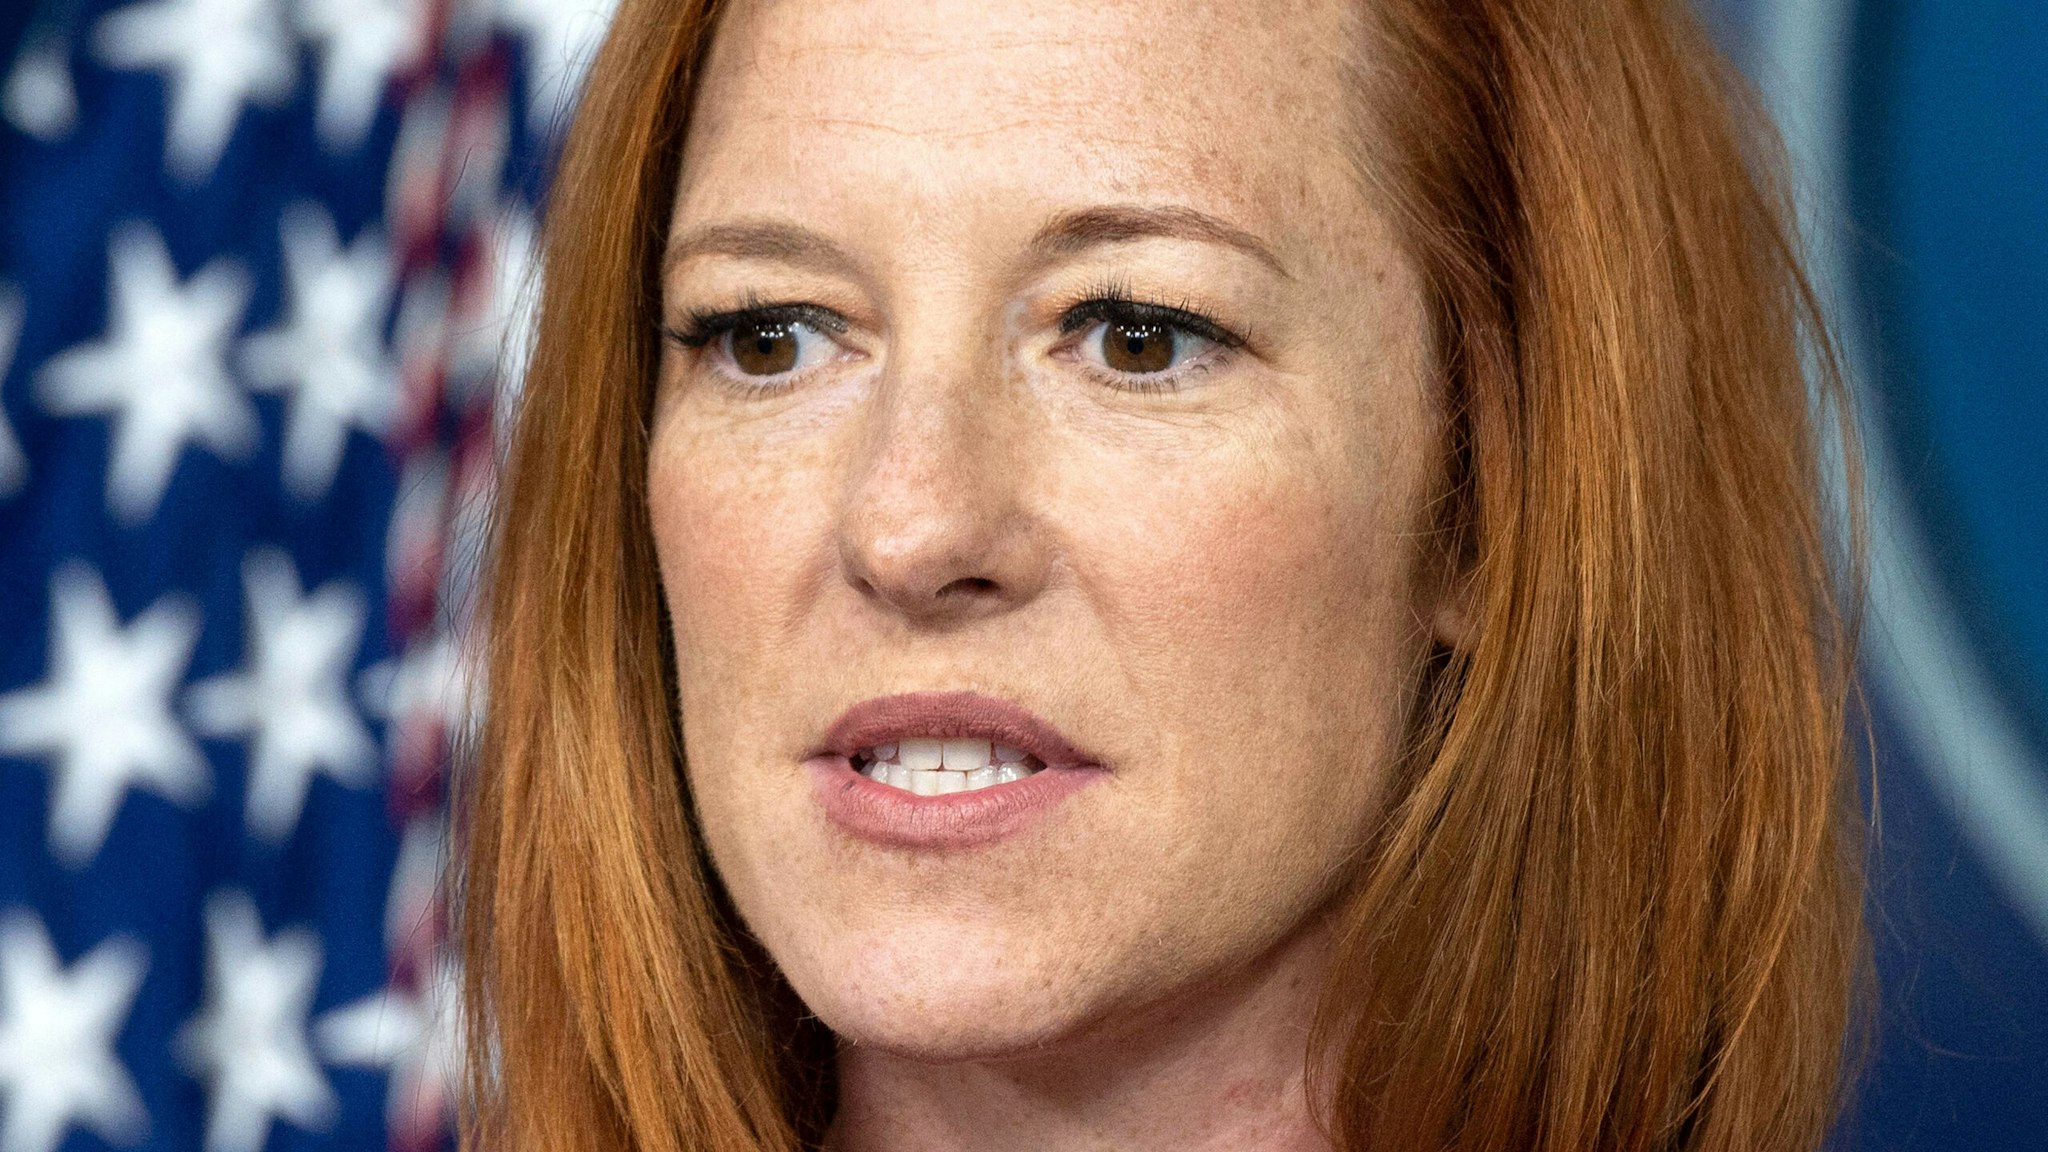 White House Press Secretary Jen Psaki speaks during the daily press briefing at the White house in Washington, DC, on July 19, 2021.